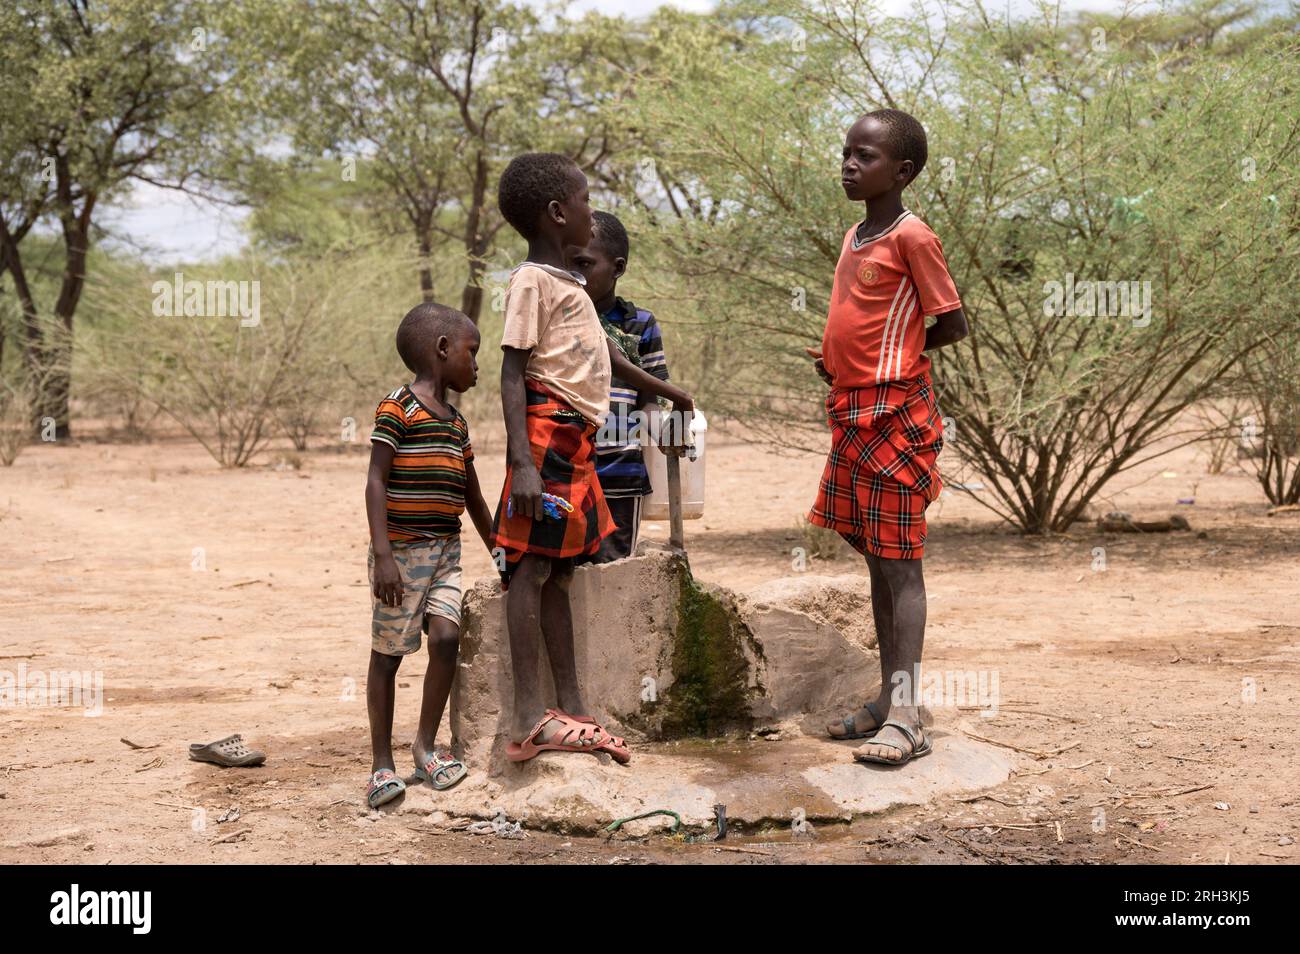 Young Kenyan boys stands by a water tap sourcing fresh water from a nearby bore hole, Baringo County, Kenya Stock Photo